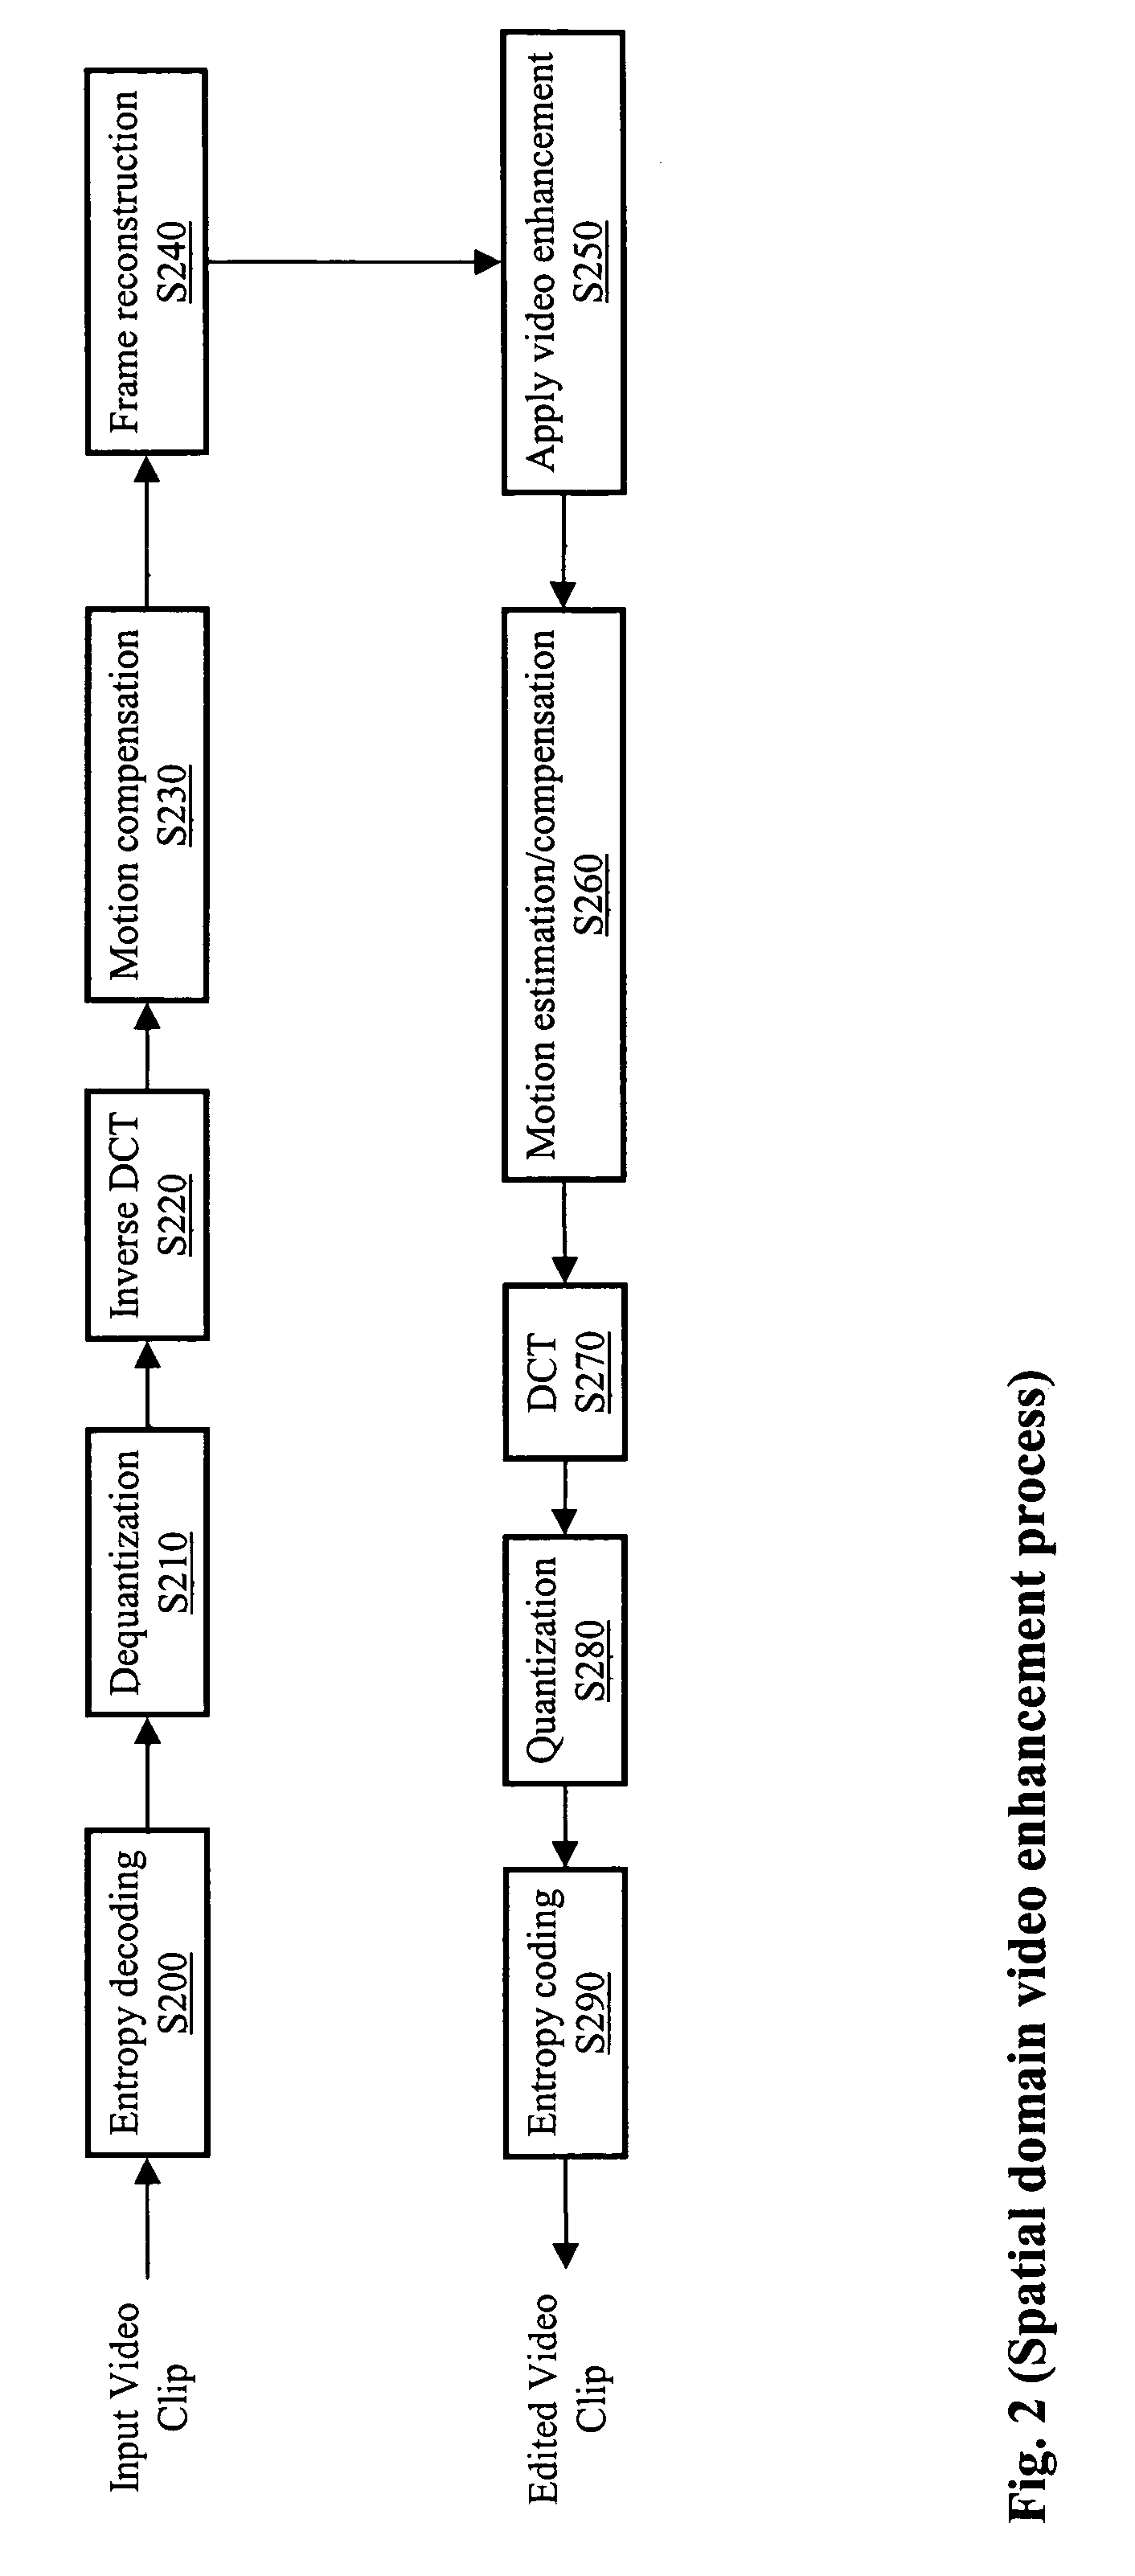 Image processing of DCT-based video sequences in compressed domain